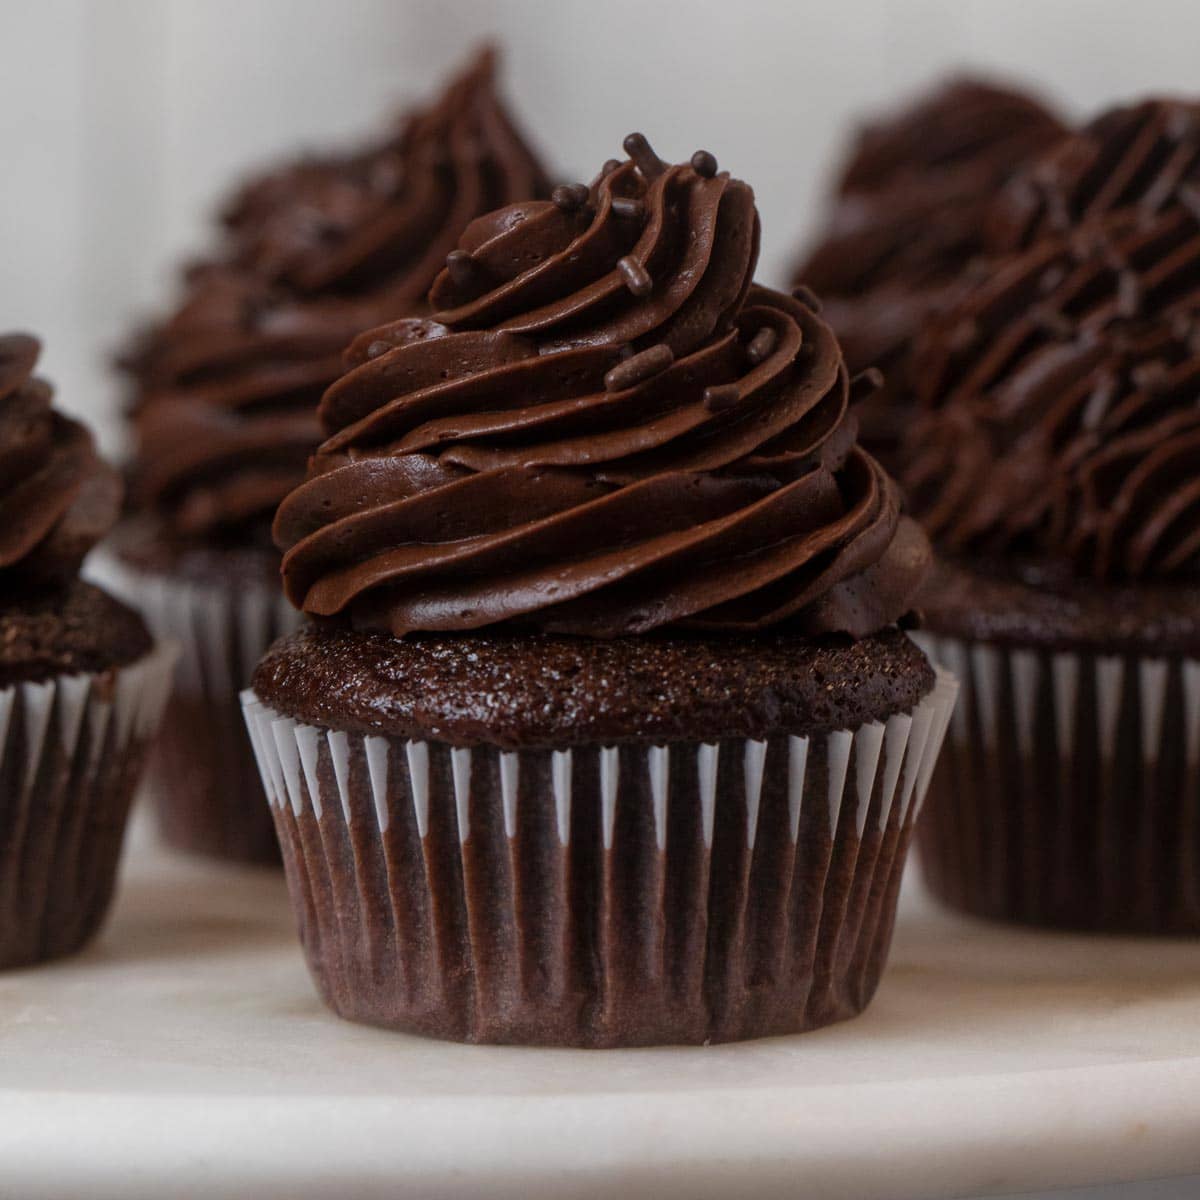 6 Chocolate Cupcakes Product Image